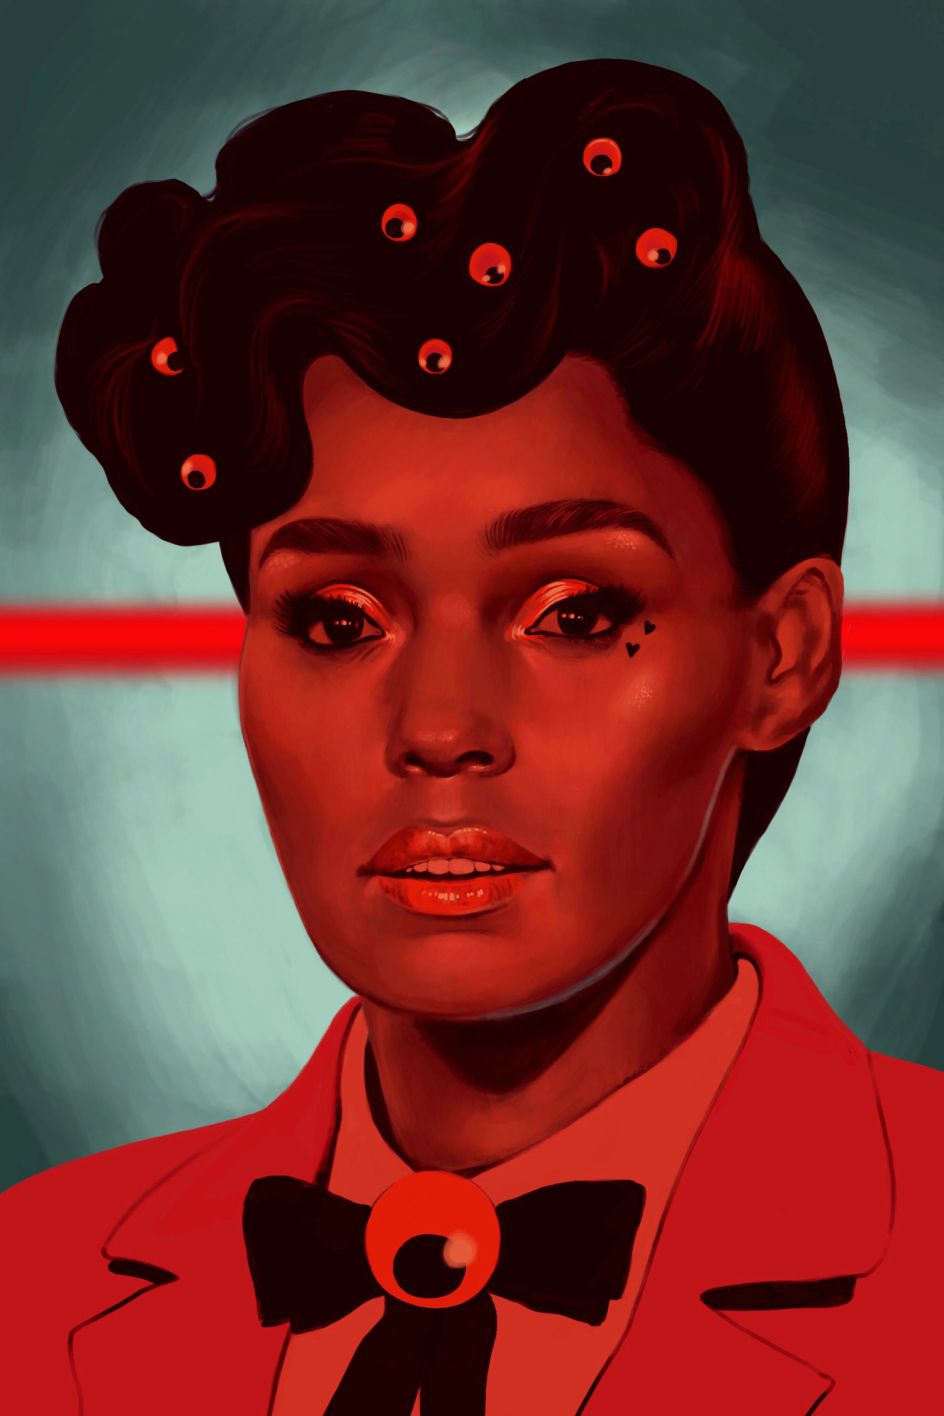 Janelle Monae, from Queer icons series